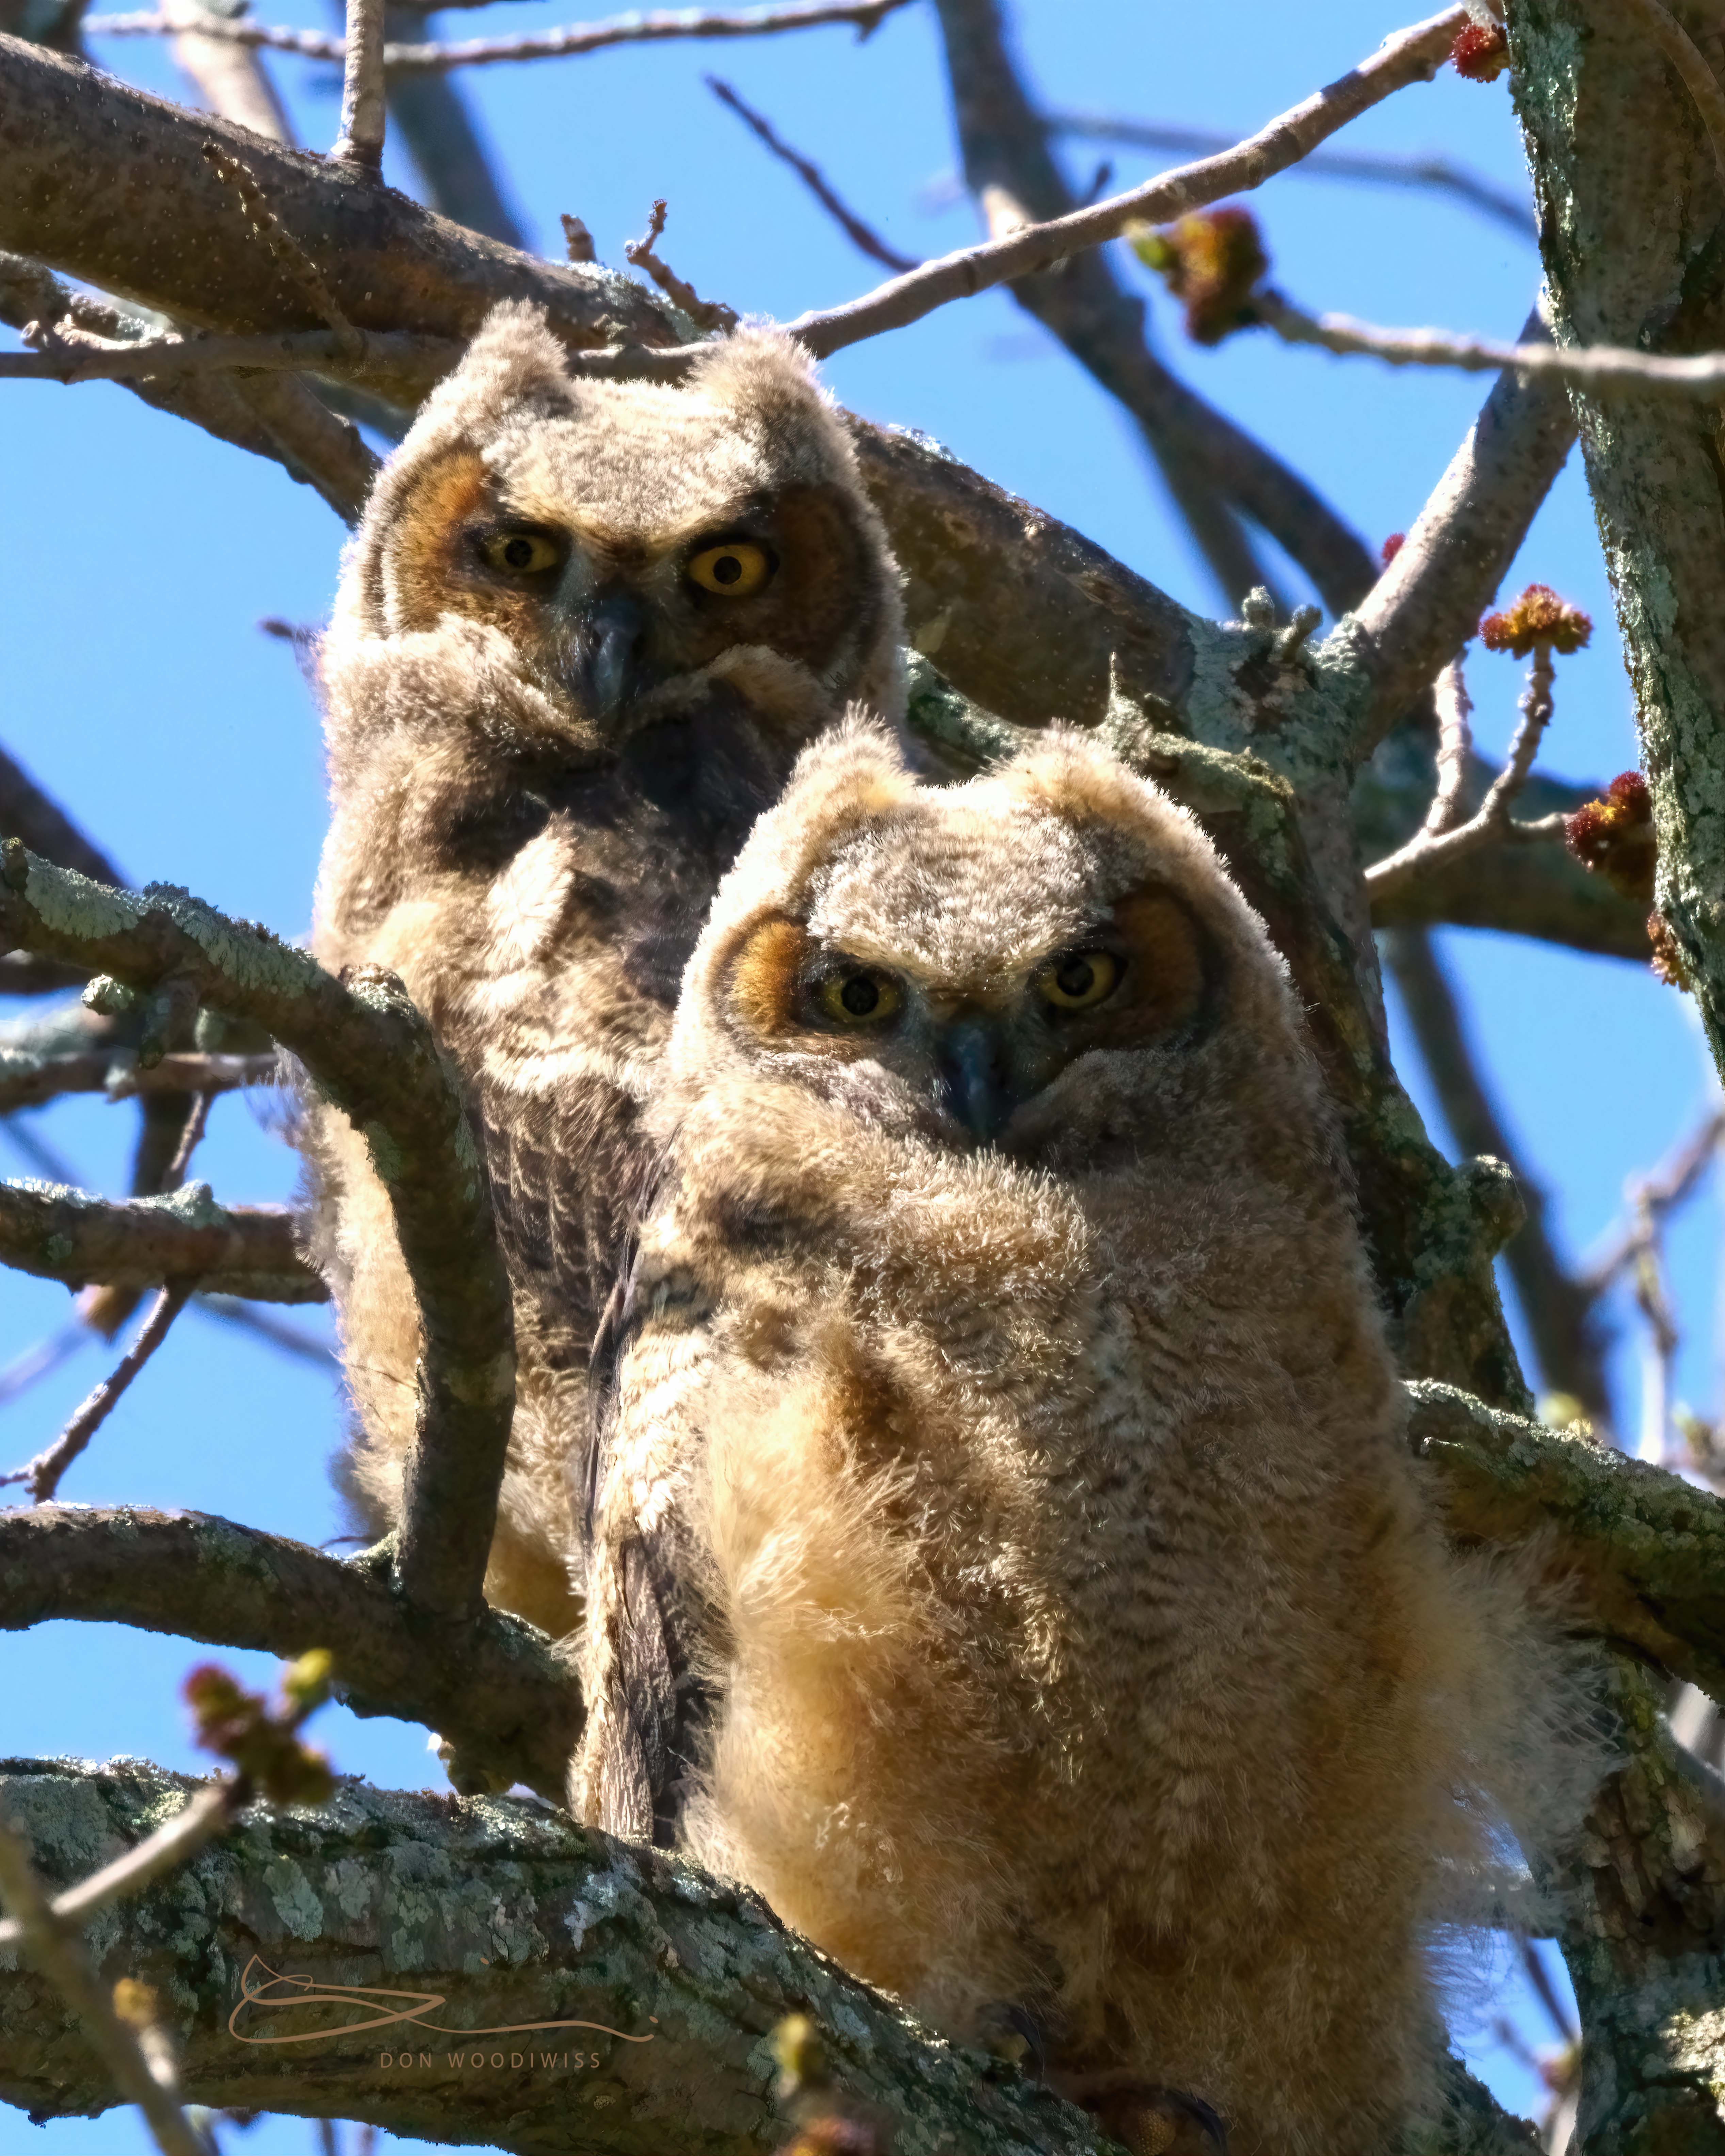 Great Horned Owlets-Don Woodiwiss-Woodiwiss Photography-Amherst Island